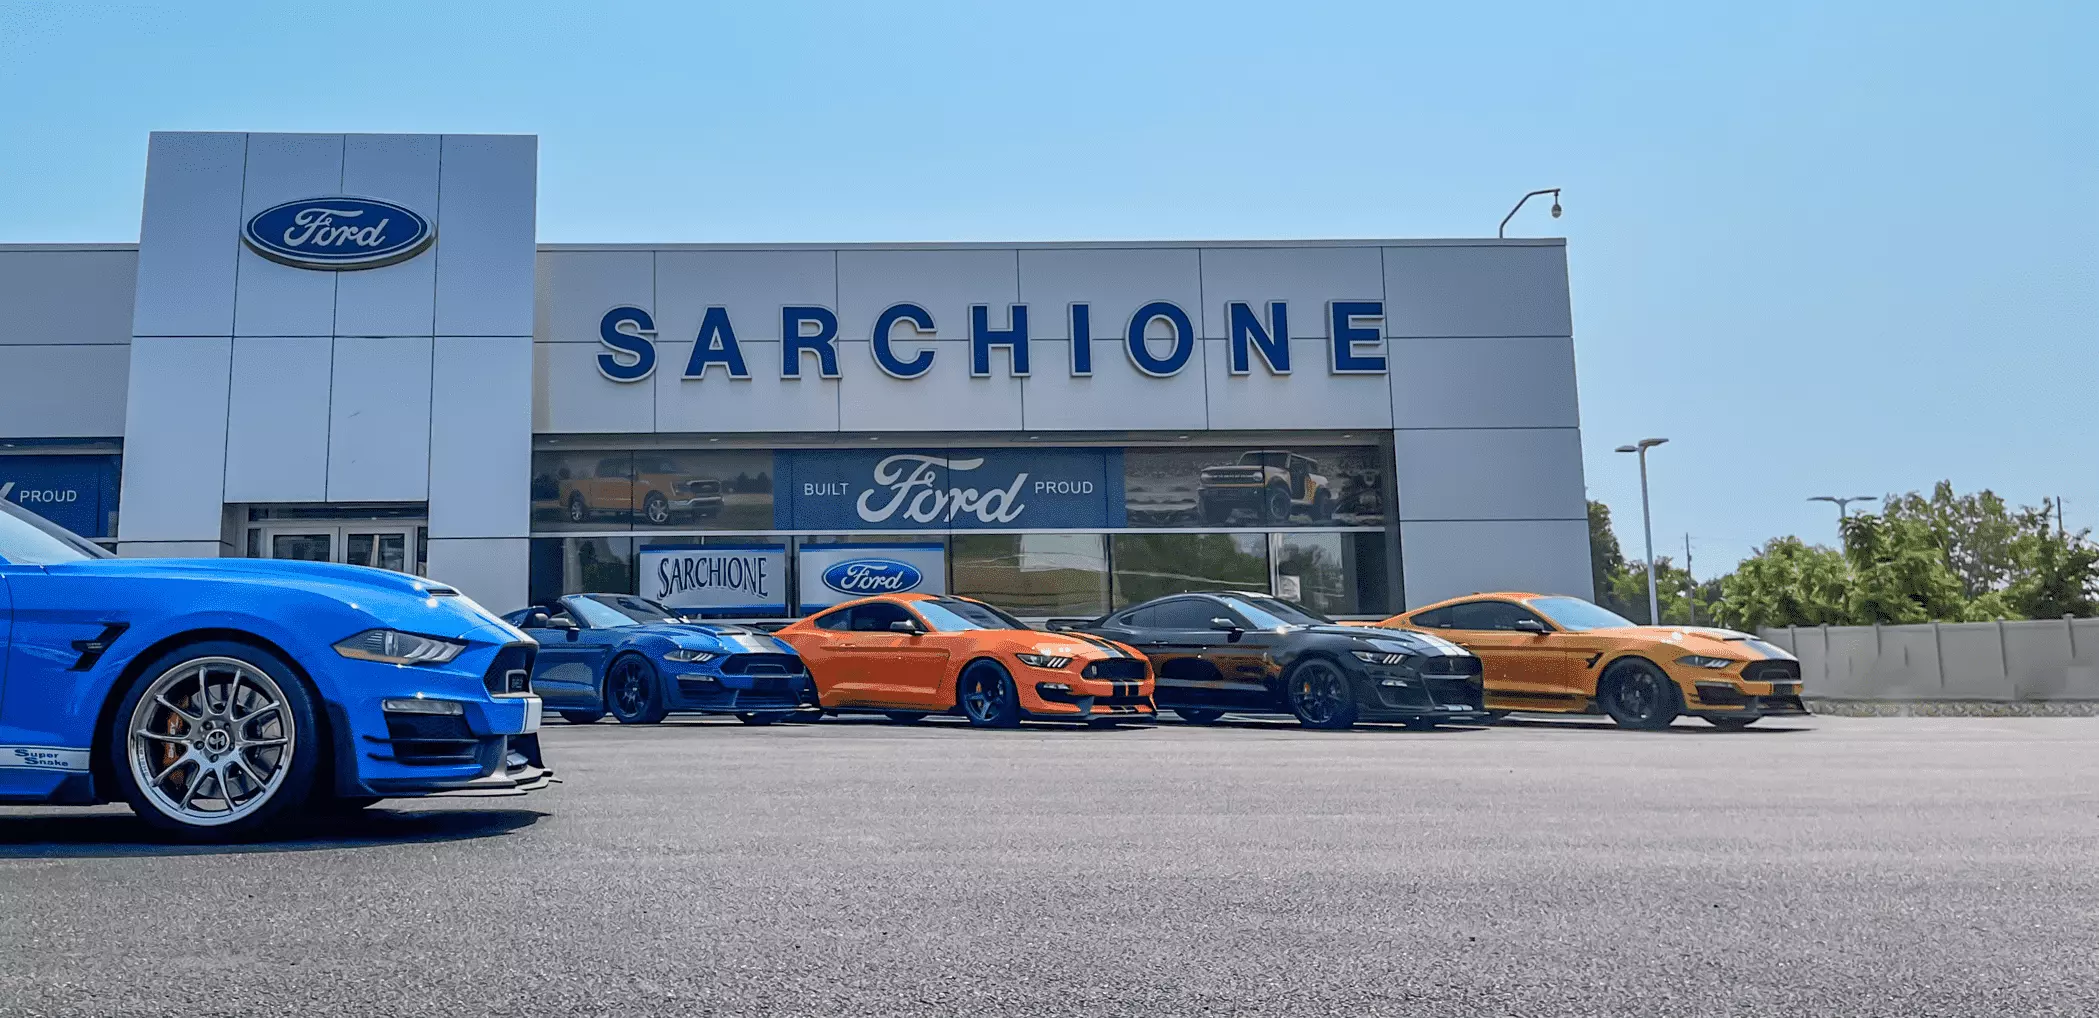 Transit-350  Browse Inventory at Sarchione Ford of Randolph in Randolph,  Ohio